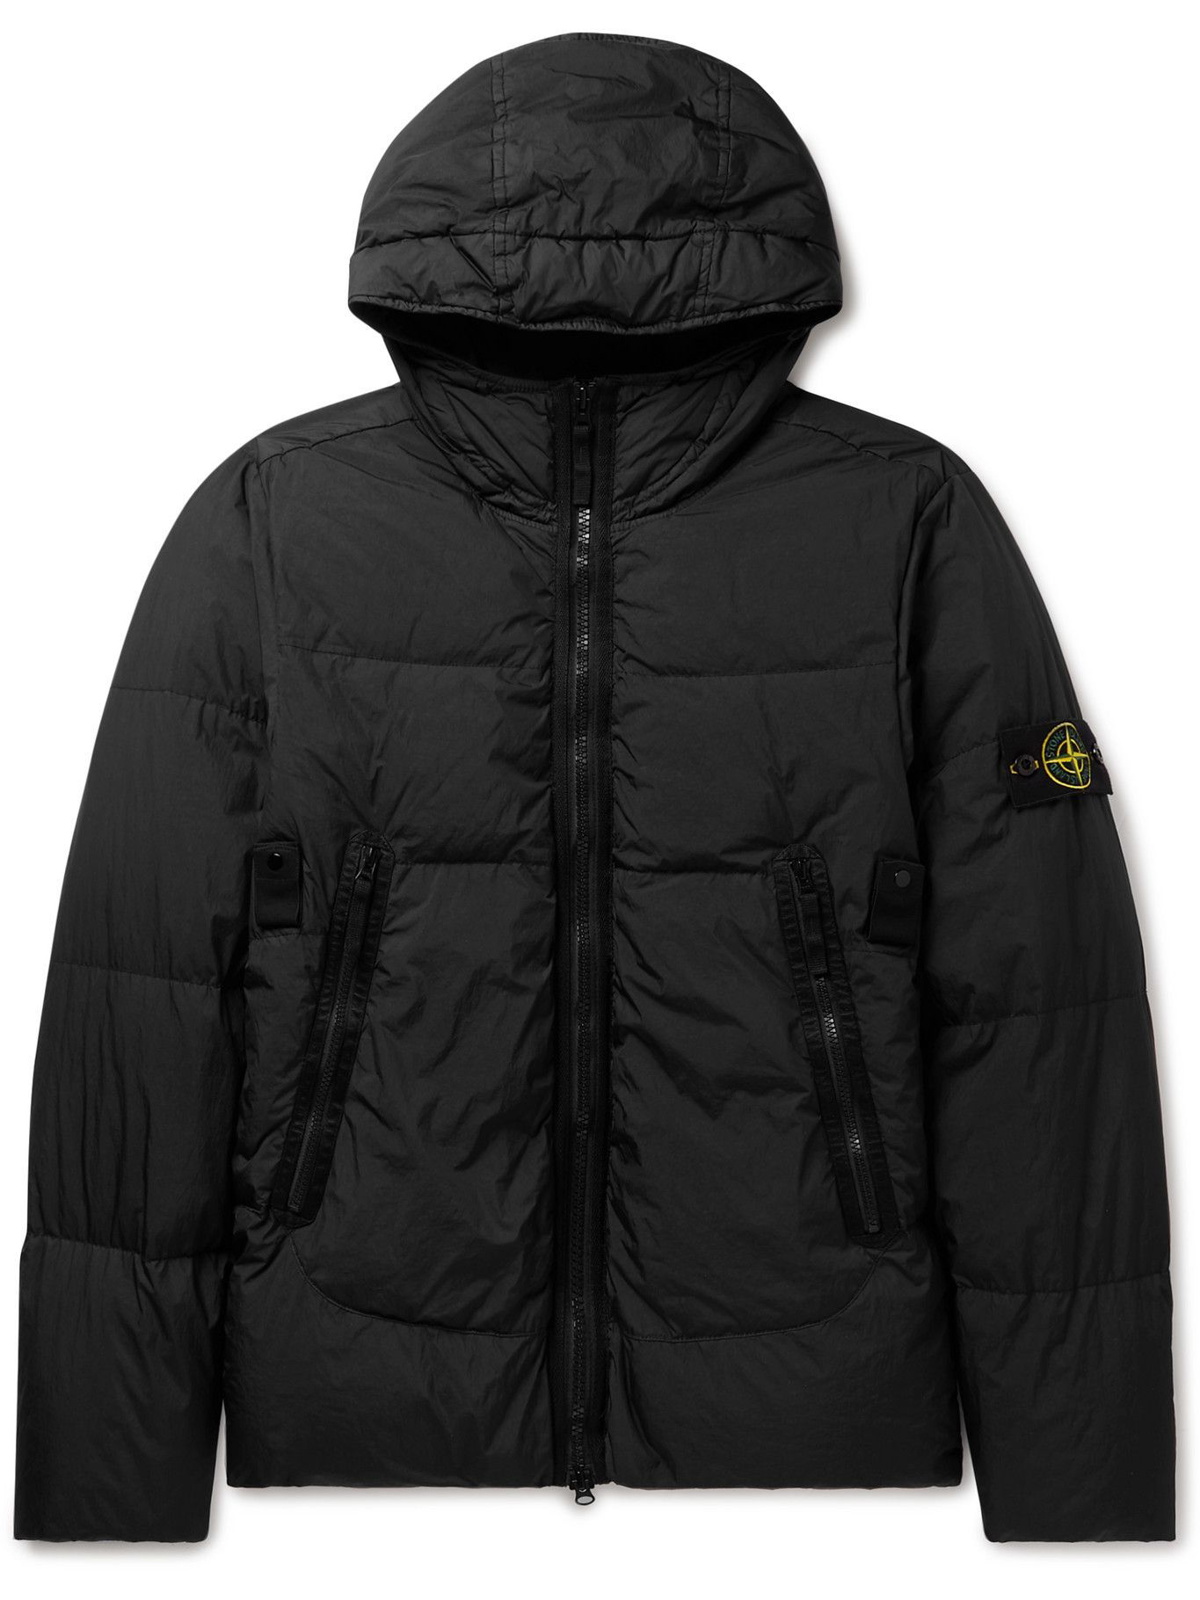 STONE ISLAND Logo-Appliquéd Quilted Nylon Hooded Down Jacket for